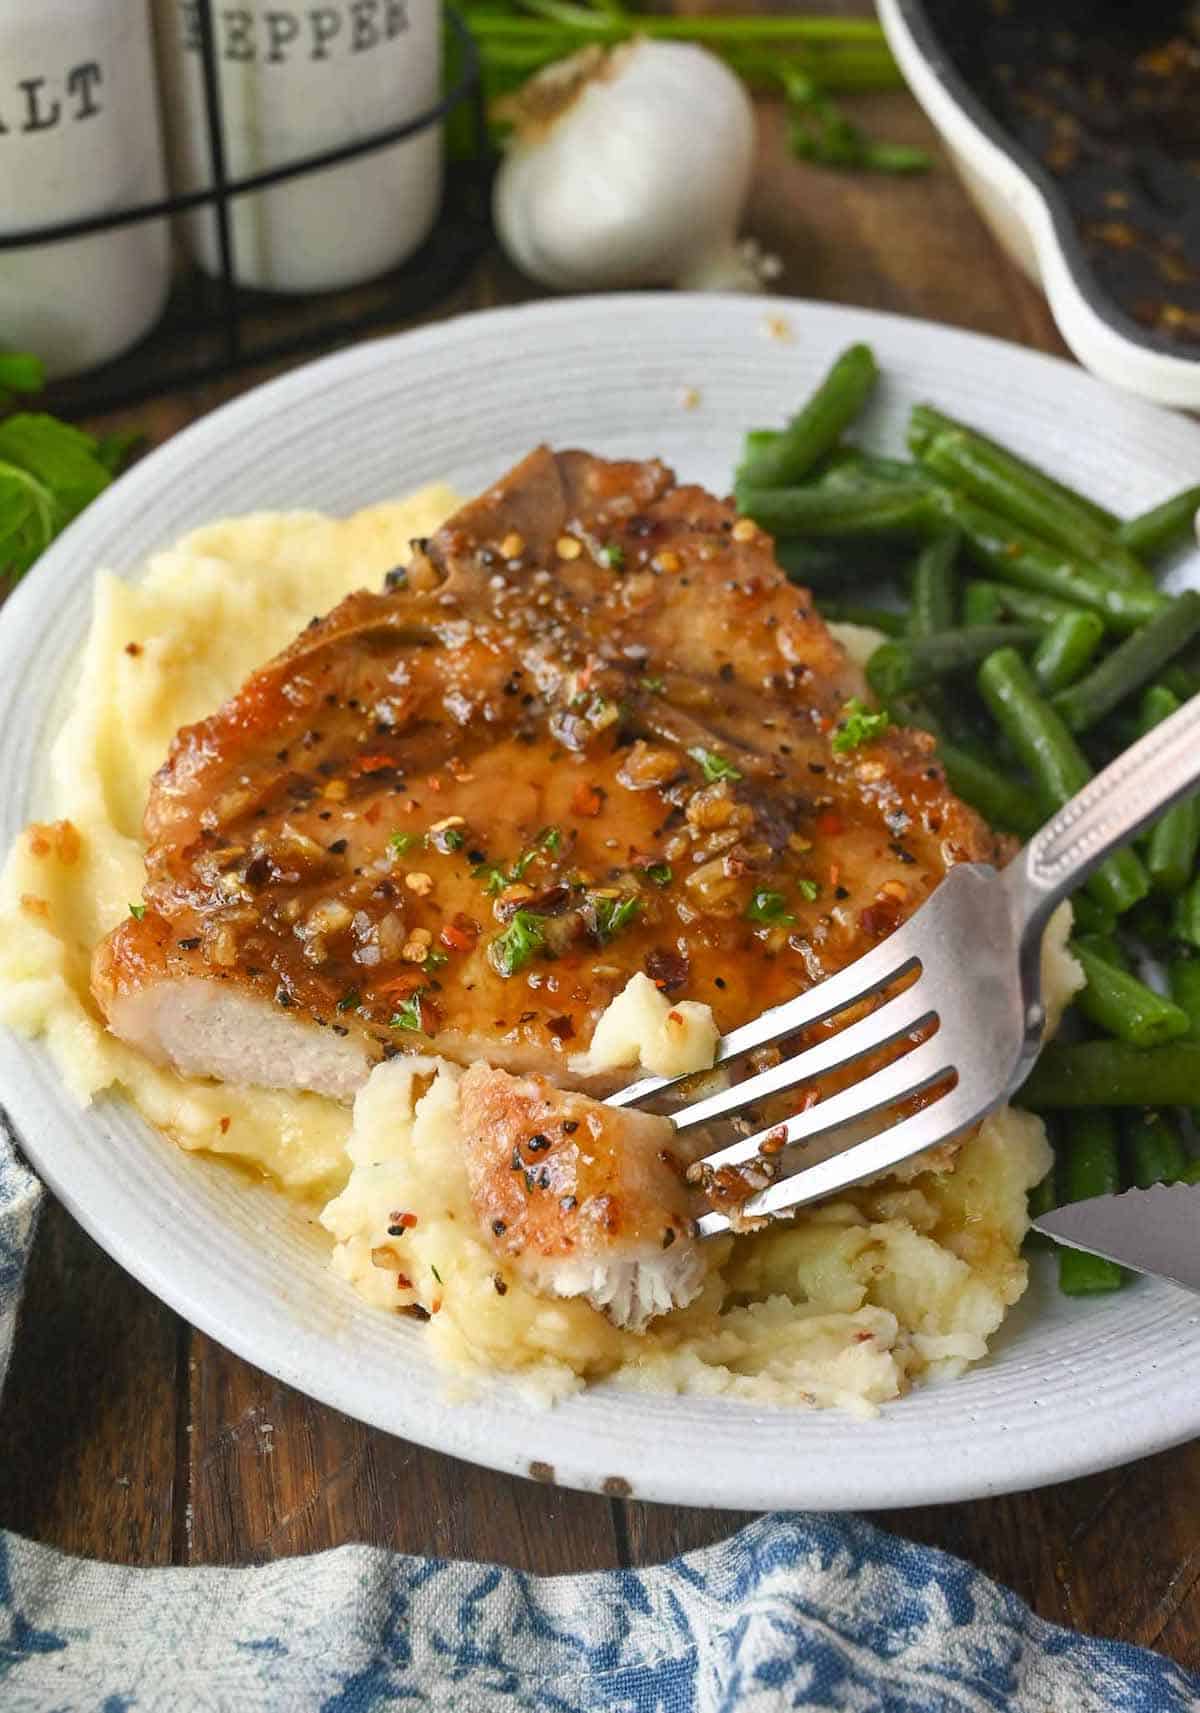 Brown sugar garlic pork chop with a piece cut on a plate with mashed potatoes and green beans.